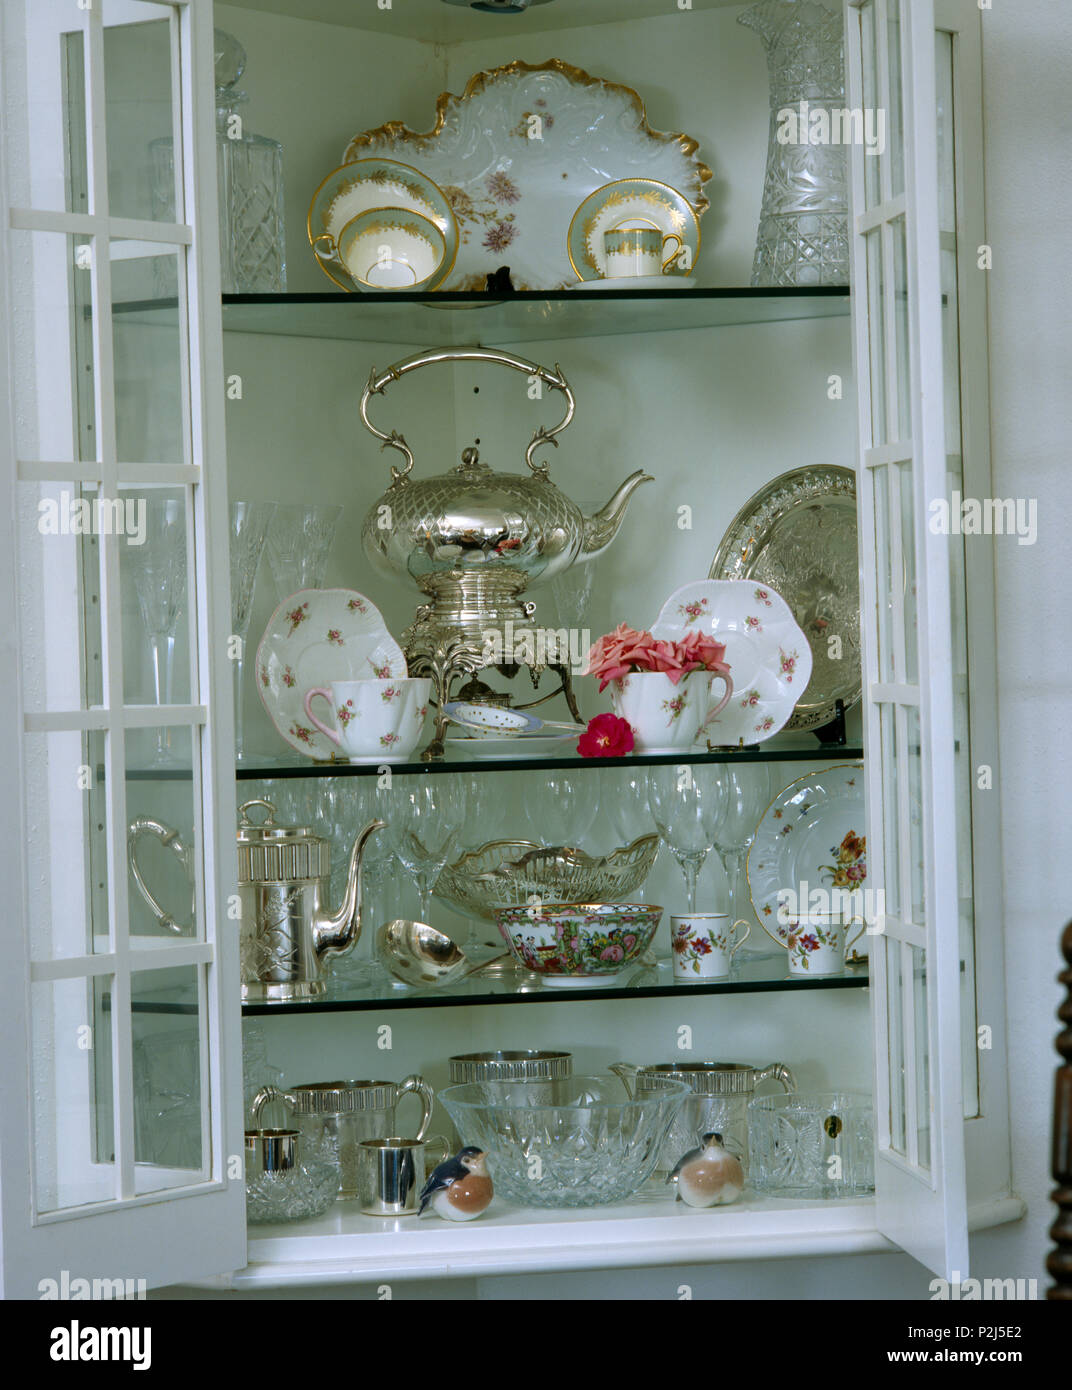 Close Up Of A Wall Cupboard With Antique Silverware And China On